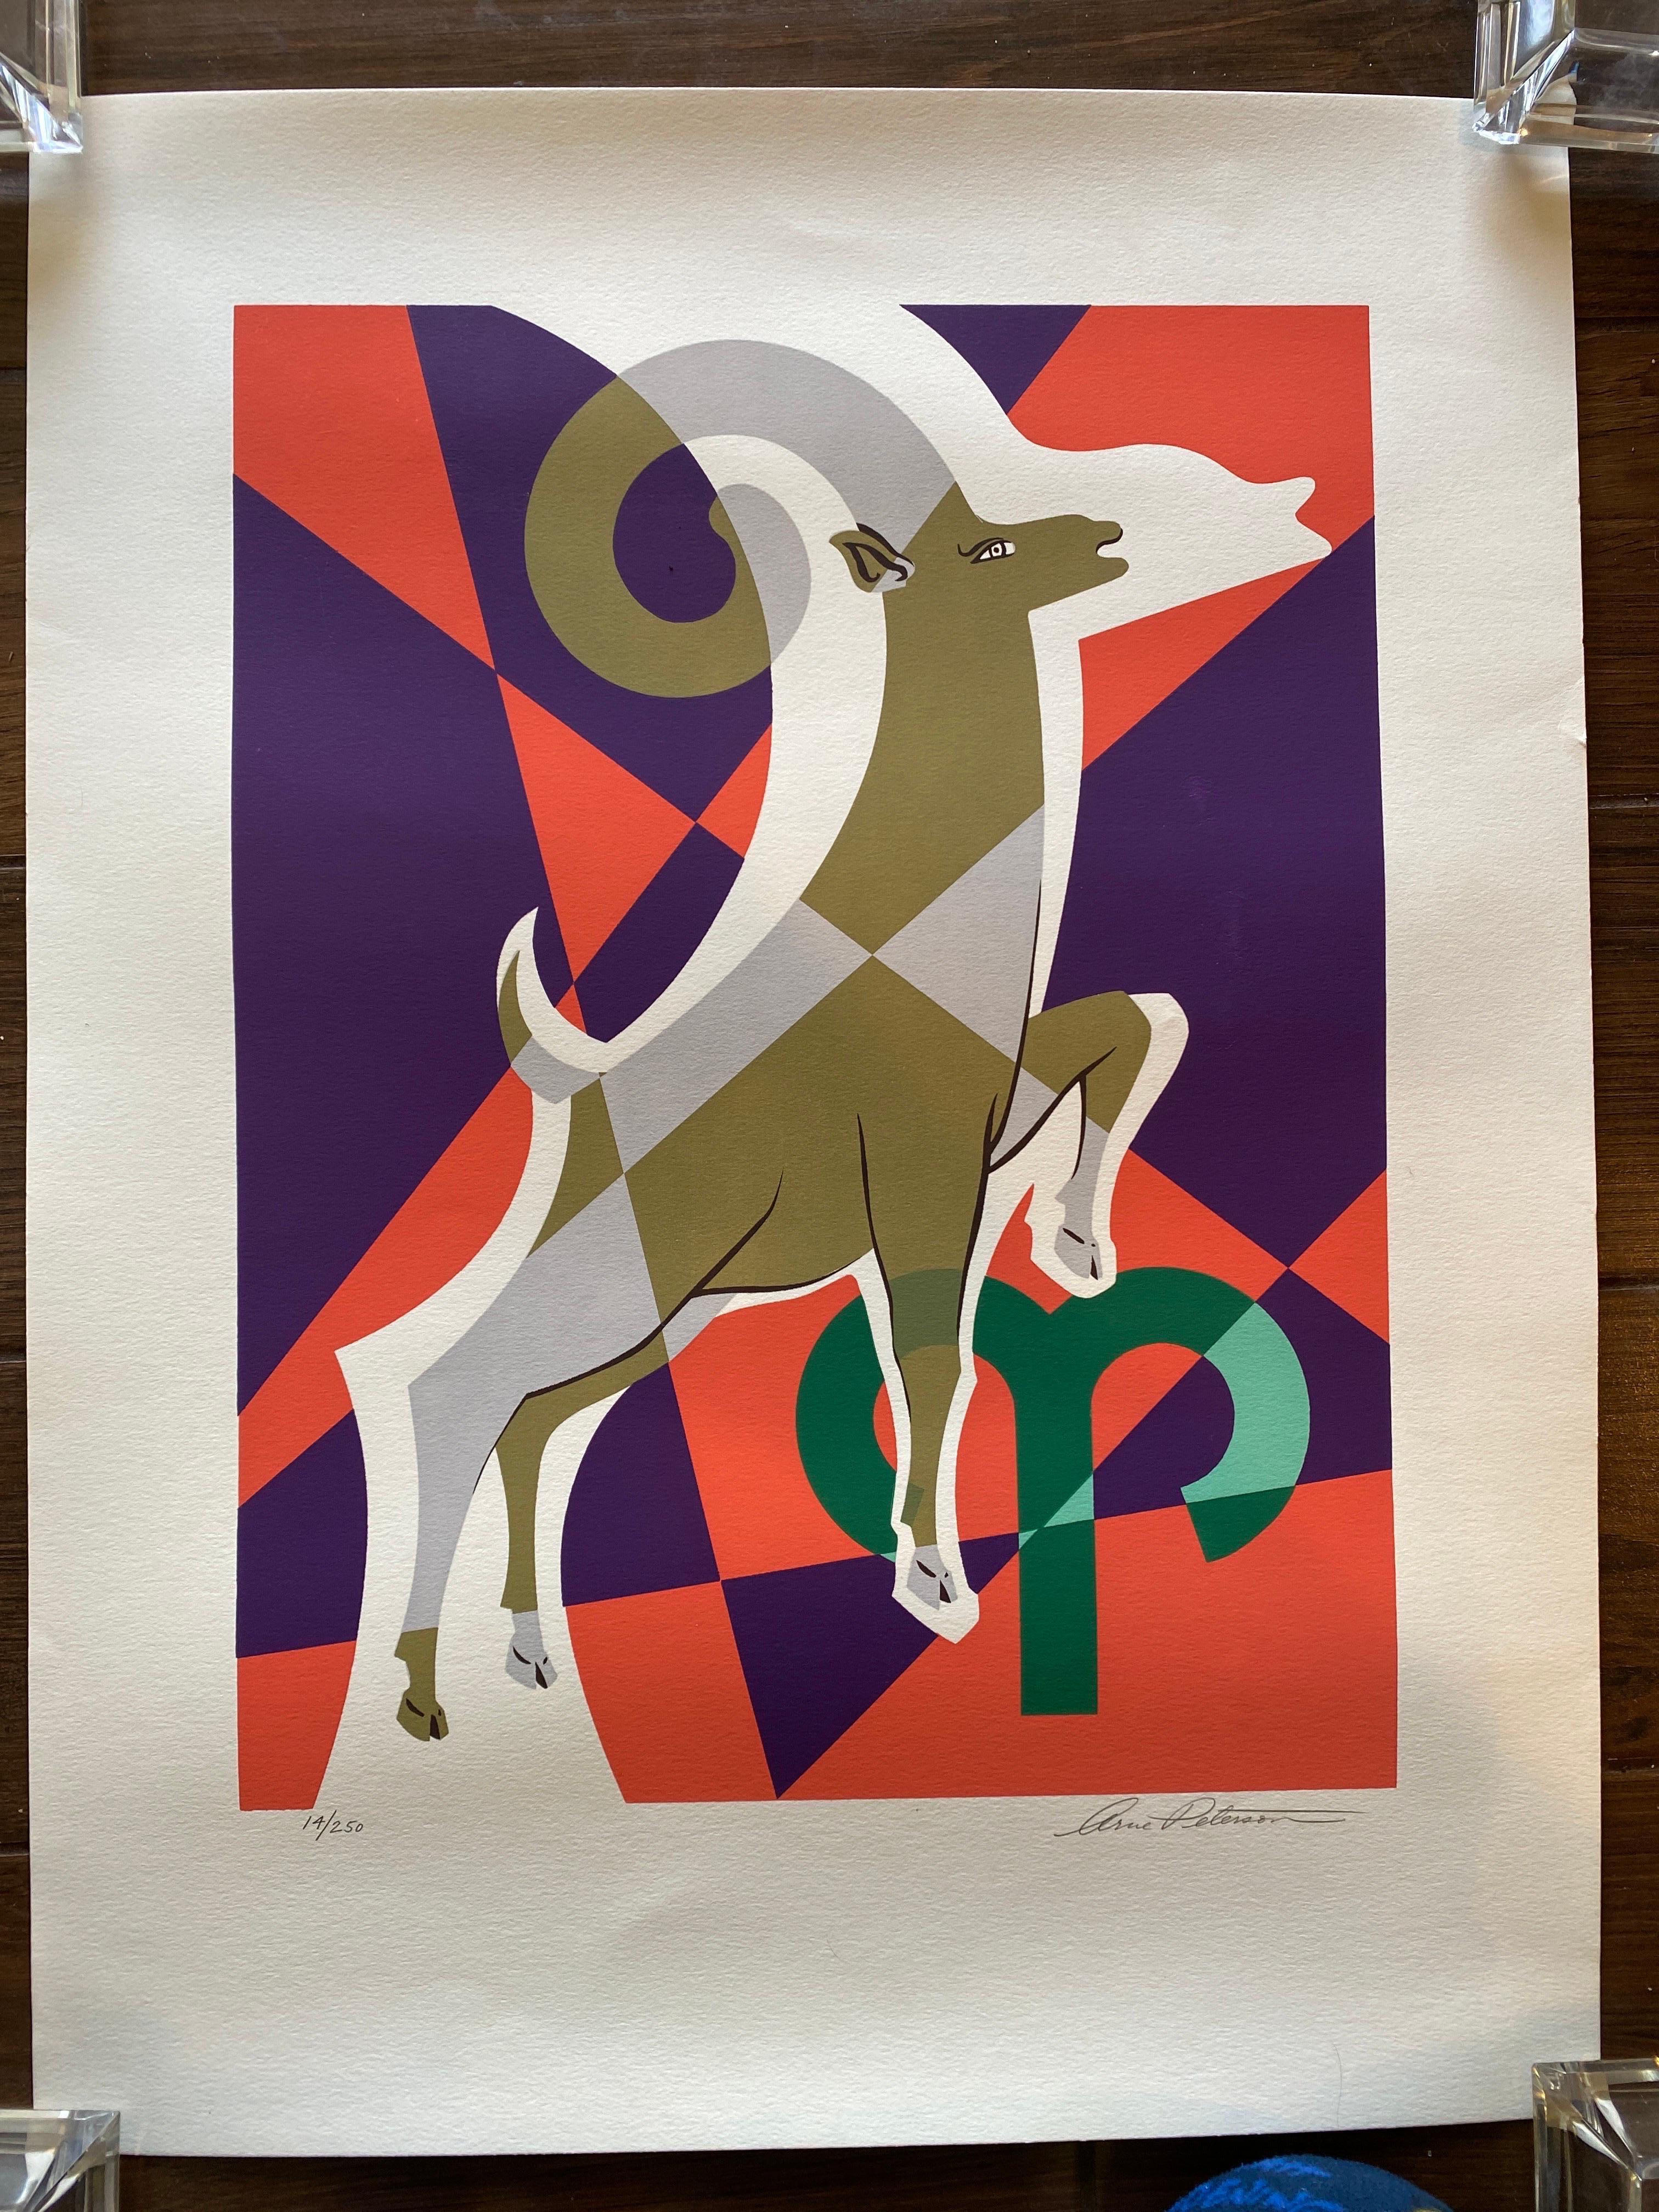 So proud to offer this Rare complete set of all 12 signs of the zodiac. Each piece is signed and numbered. The artist is Arne Peterson. We are not sure if these were printed in the late 50s or 60s. There is no date on the hand printed silkscreens.